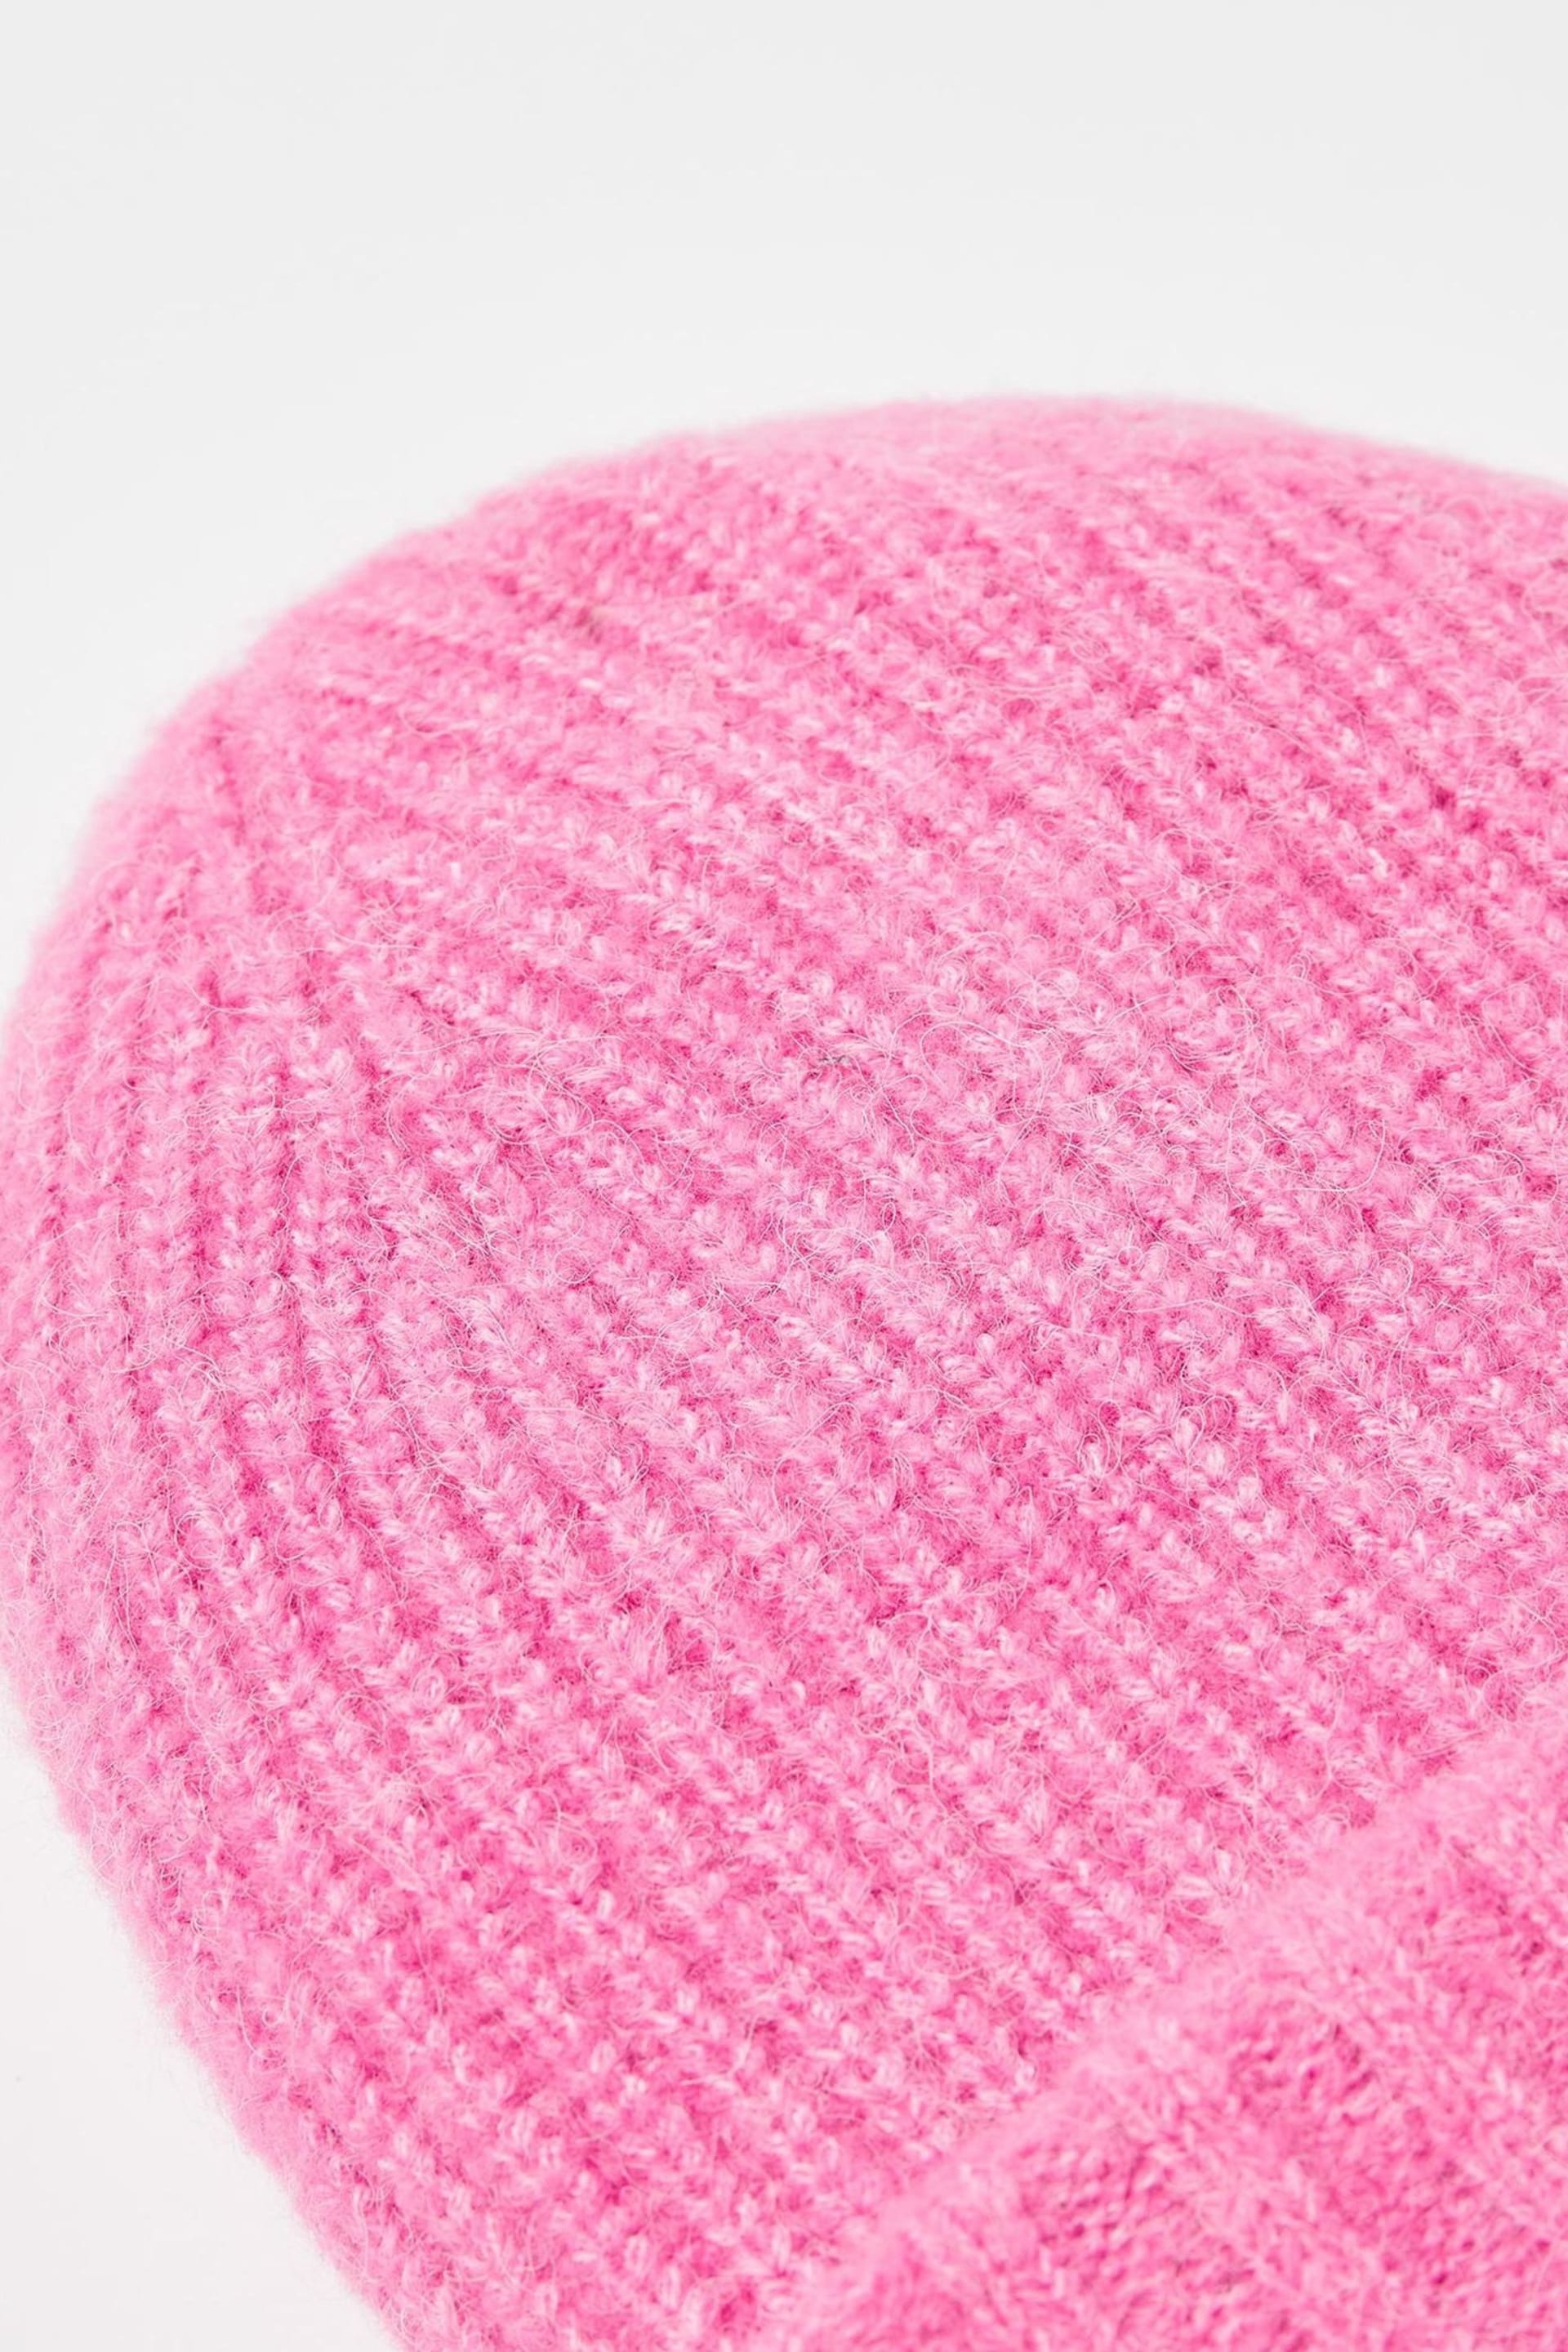 Oliver Bonas Pink Rib Knitted Beanie Hat - Image 3 of 4